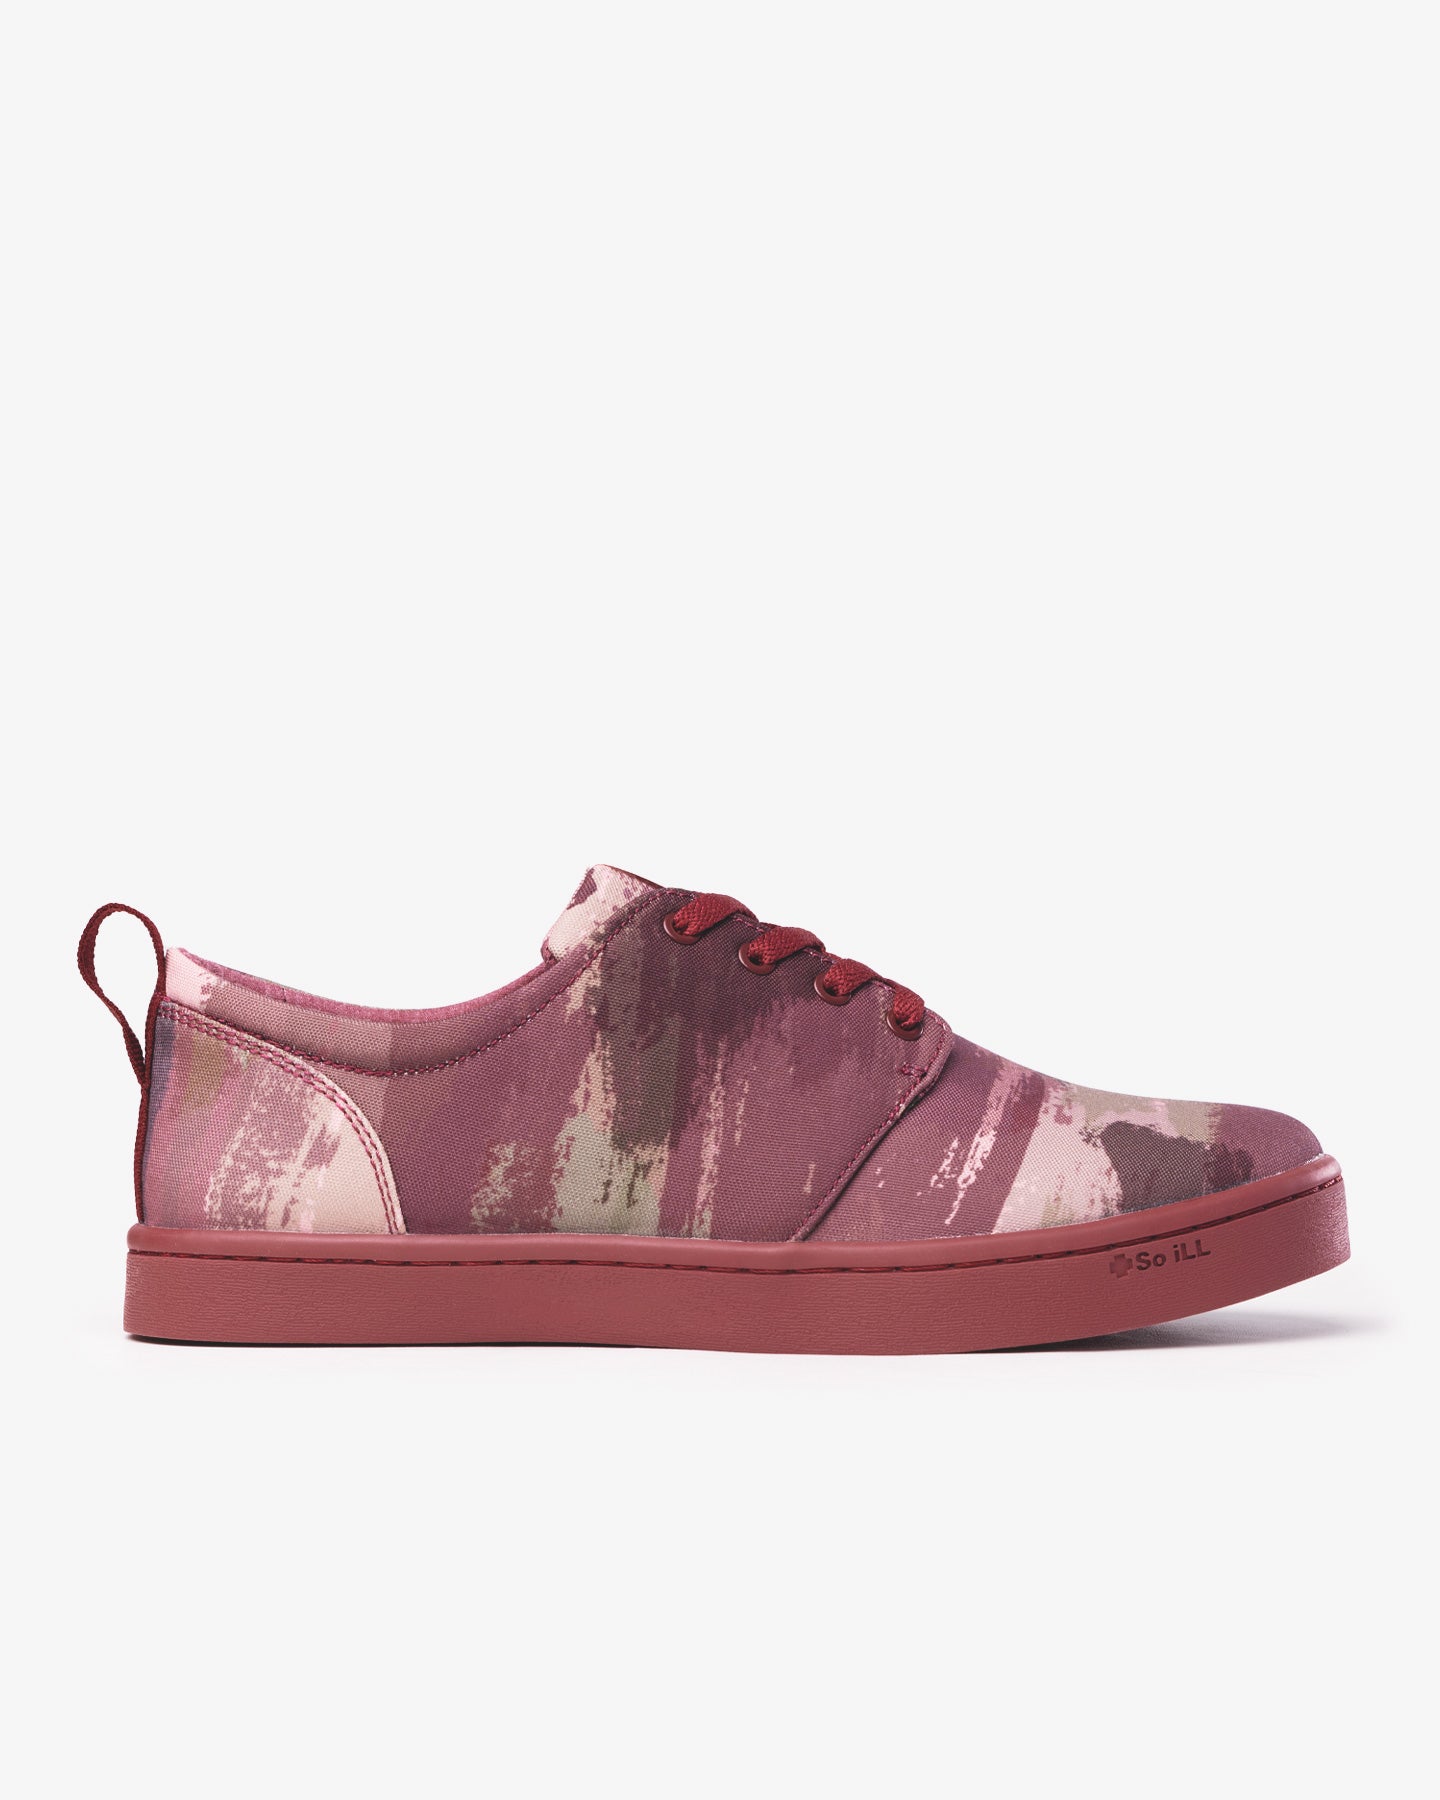 Eco Camo Wino showing the outer side of the shoe